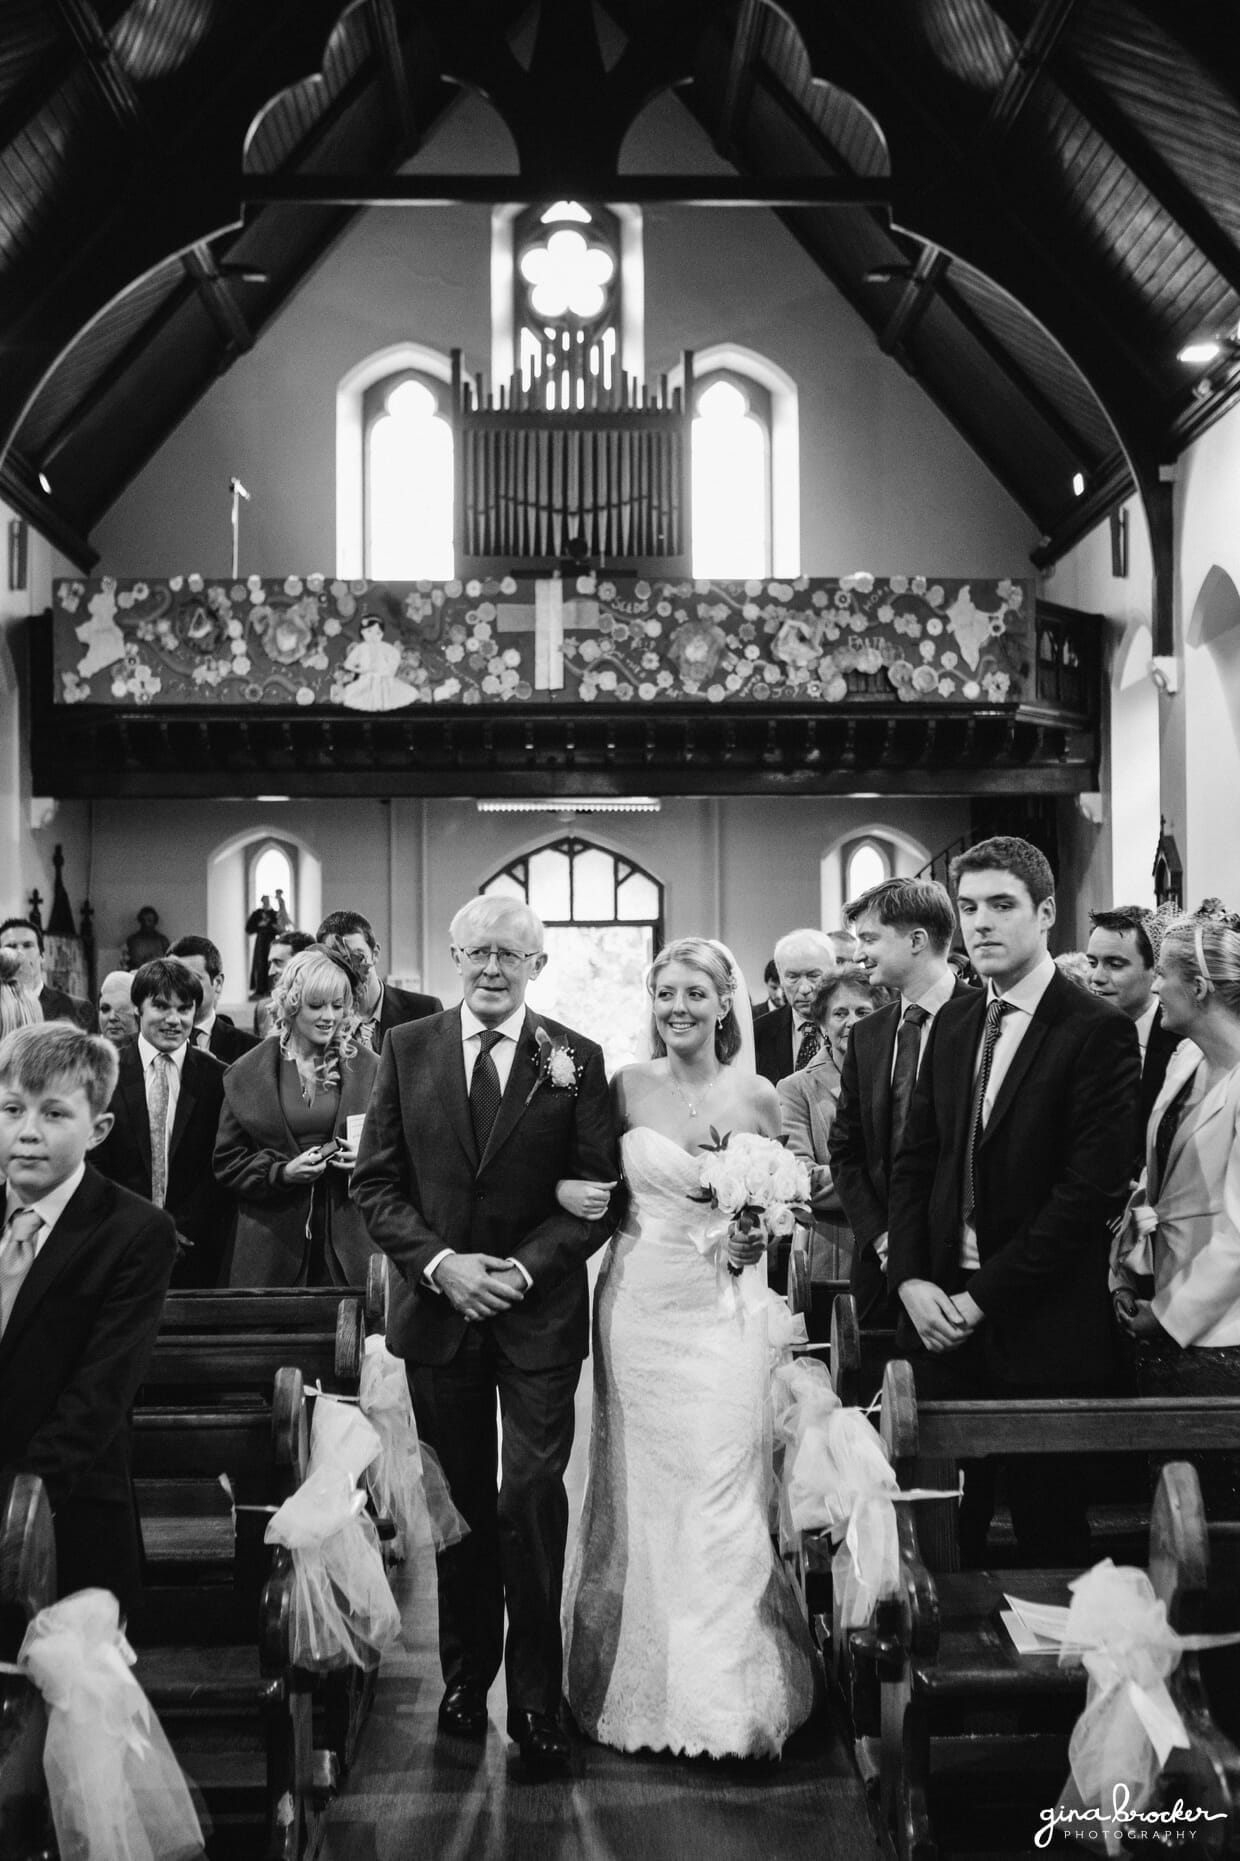 The classic bride walks up the aisle with her father during an intimate church wedding